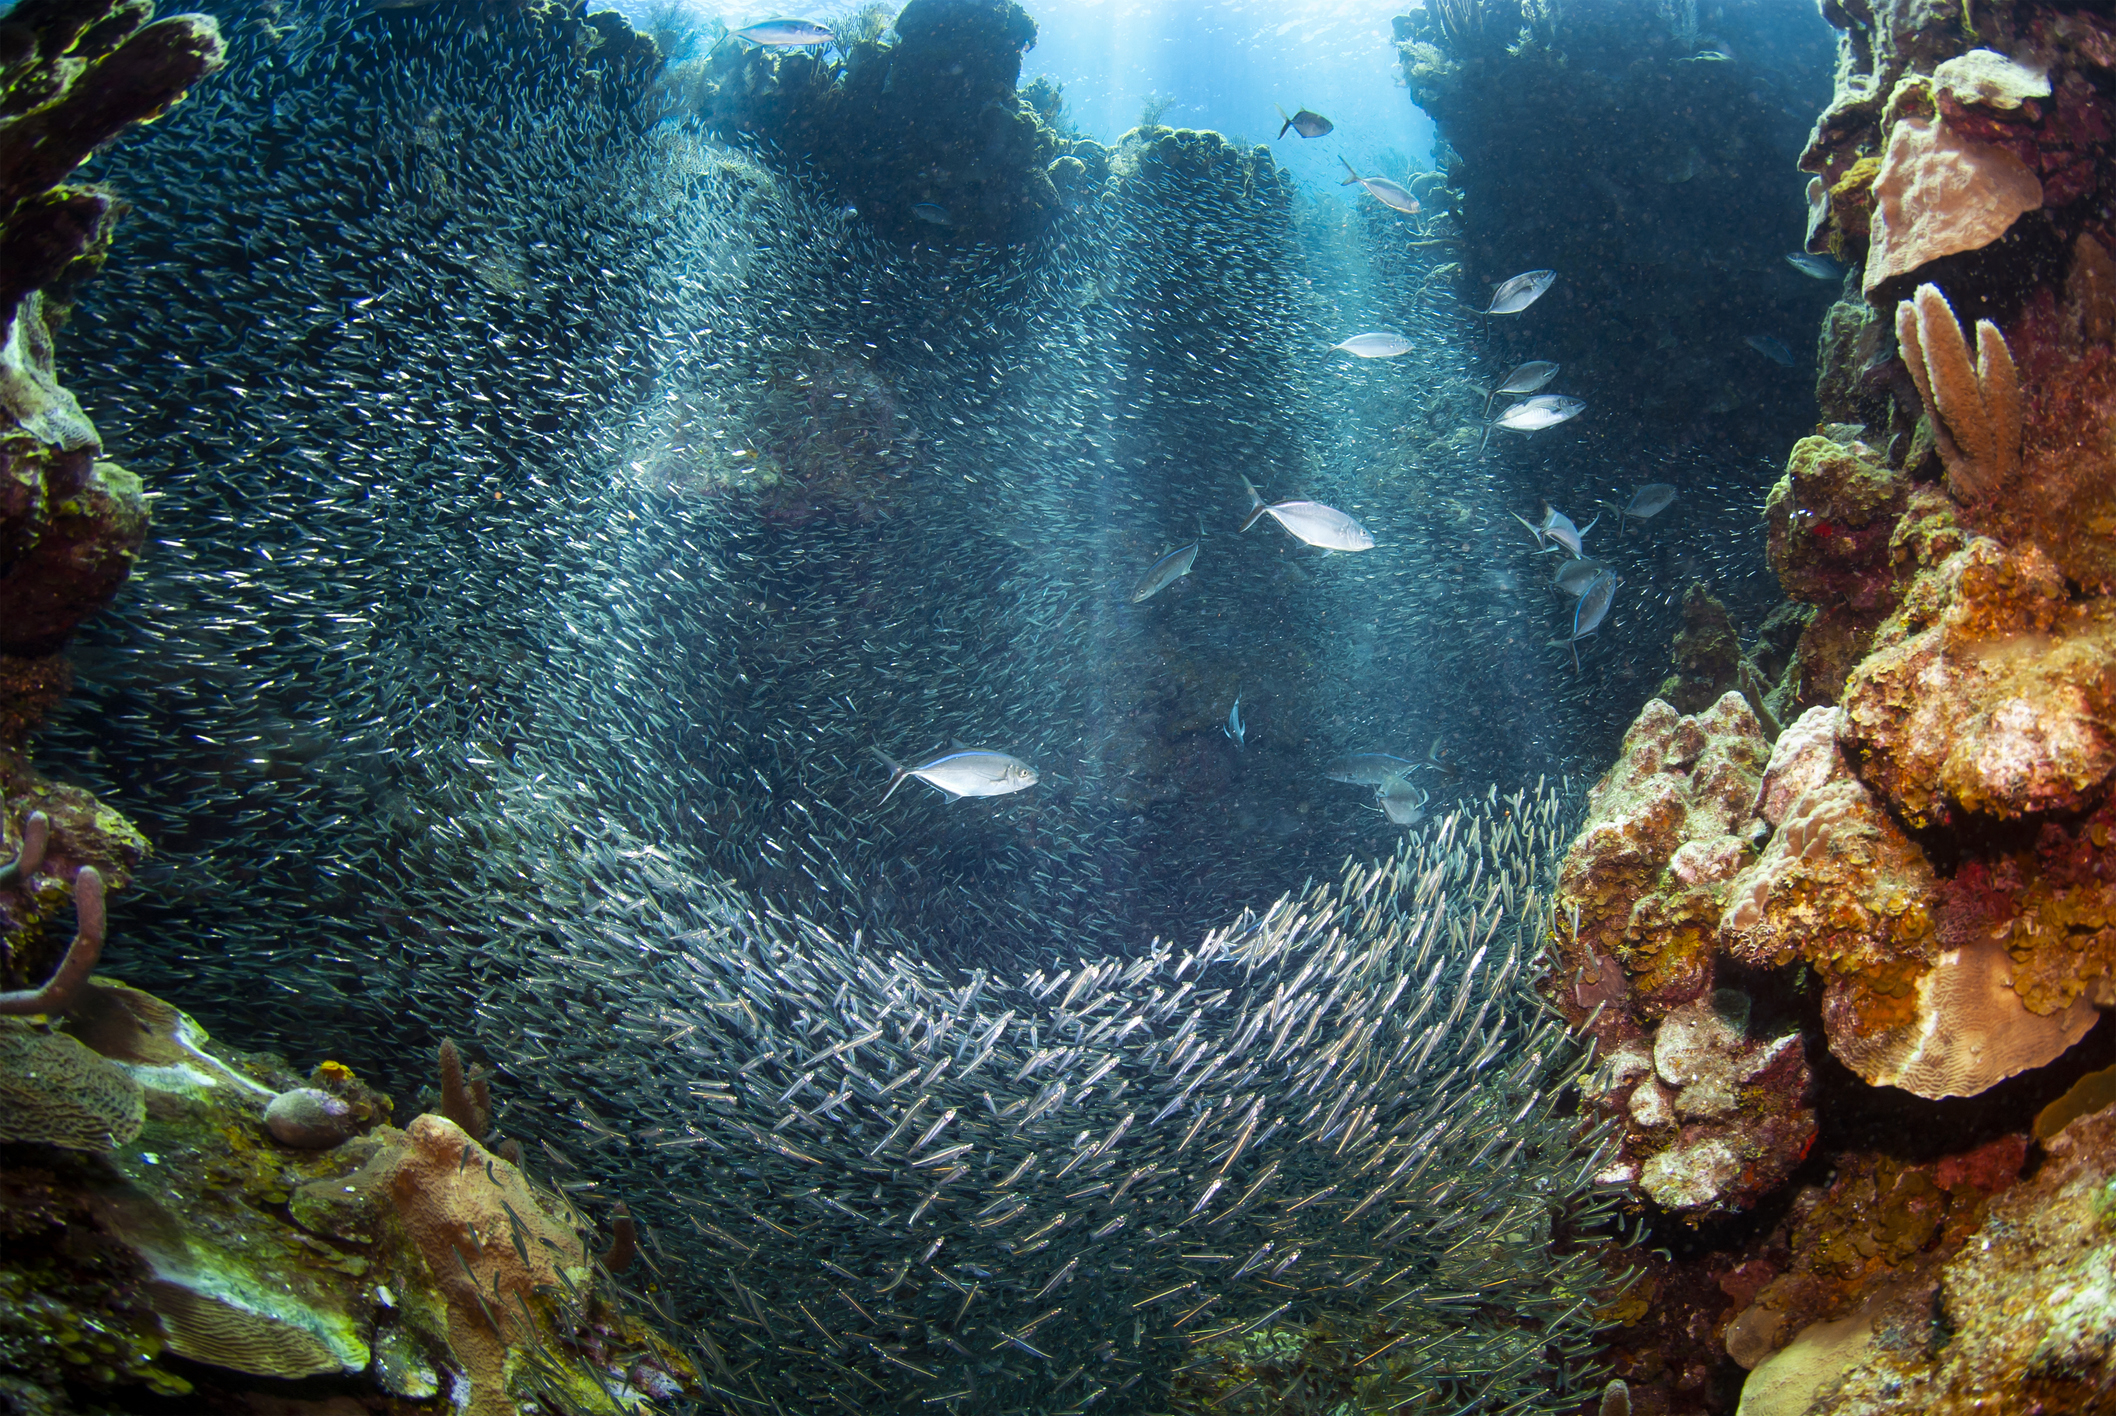 School of fish in a dense formation among underwater coral formations, with light filtering from above